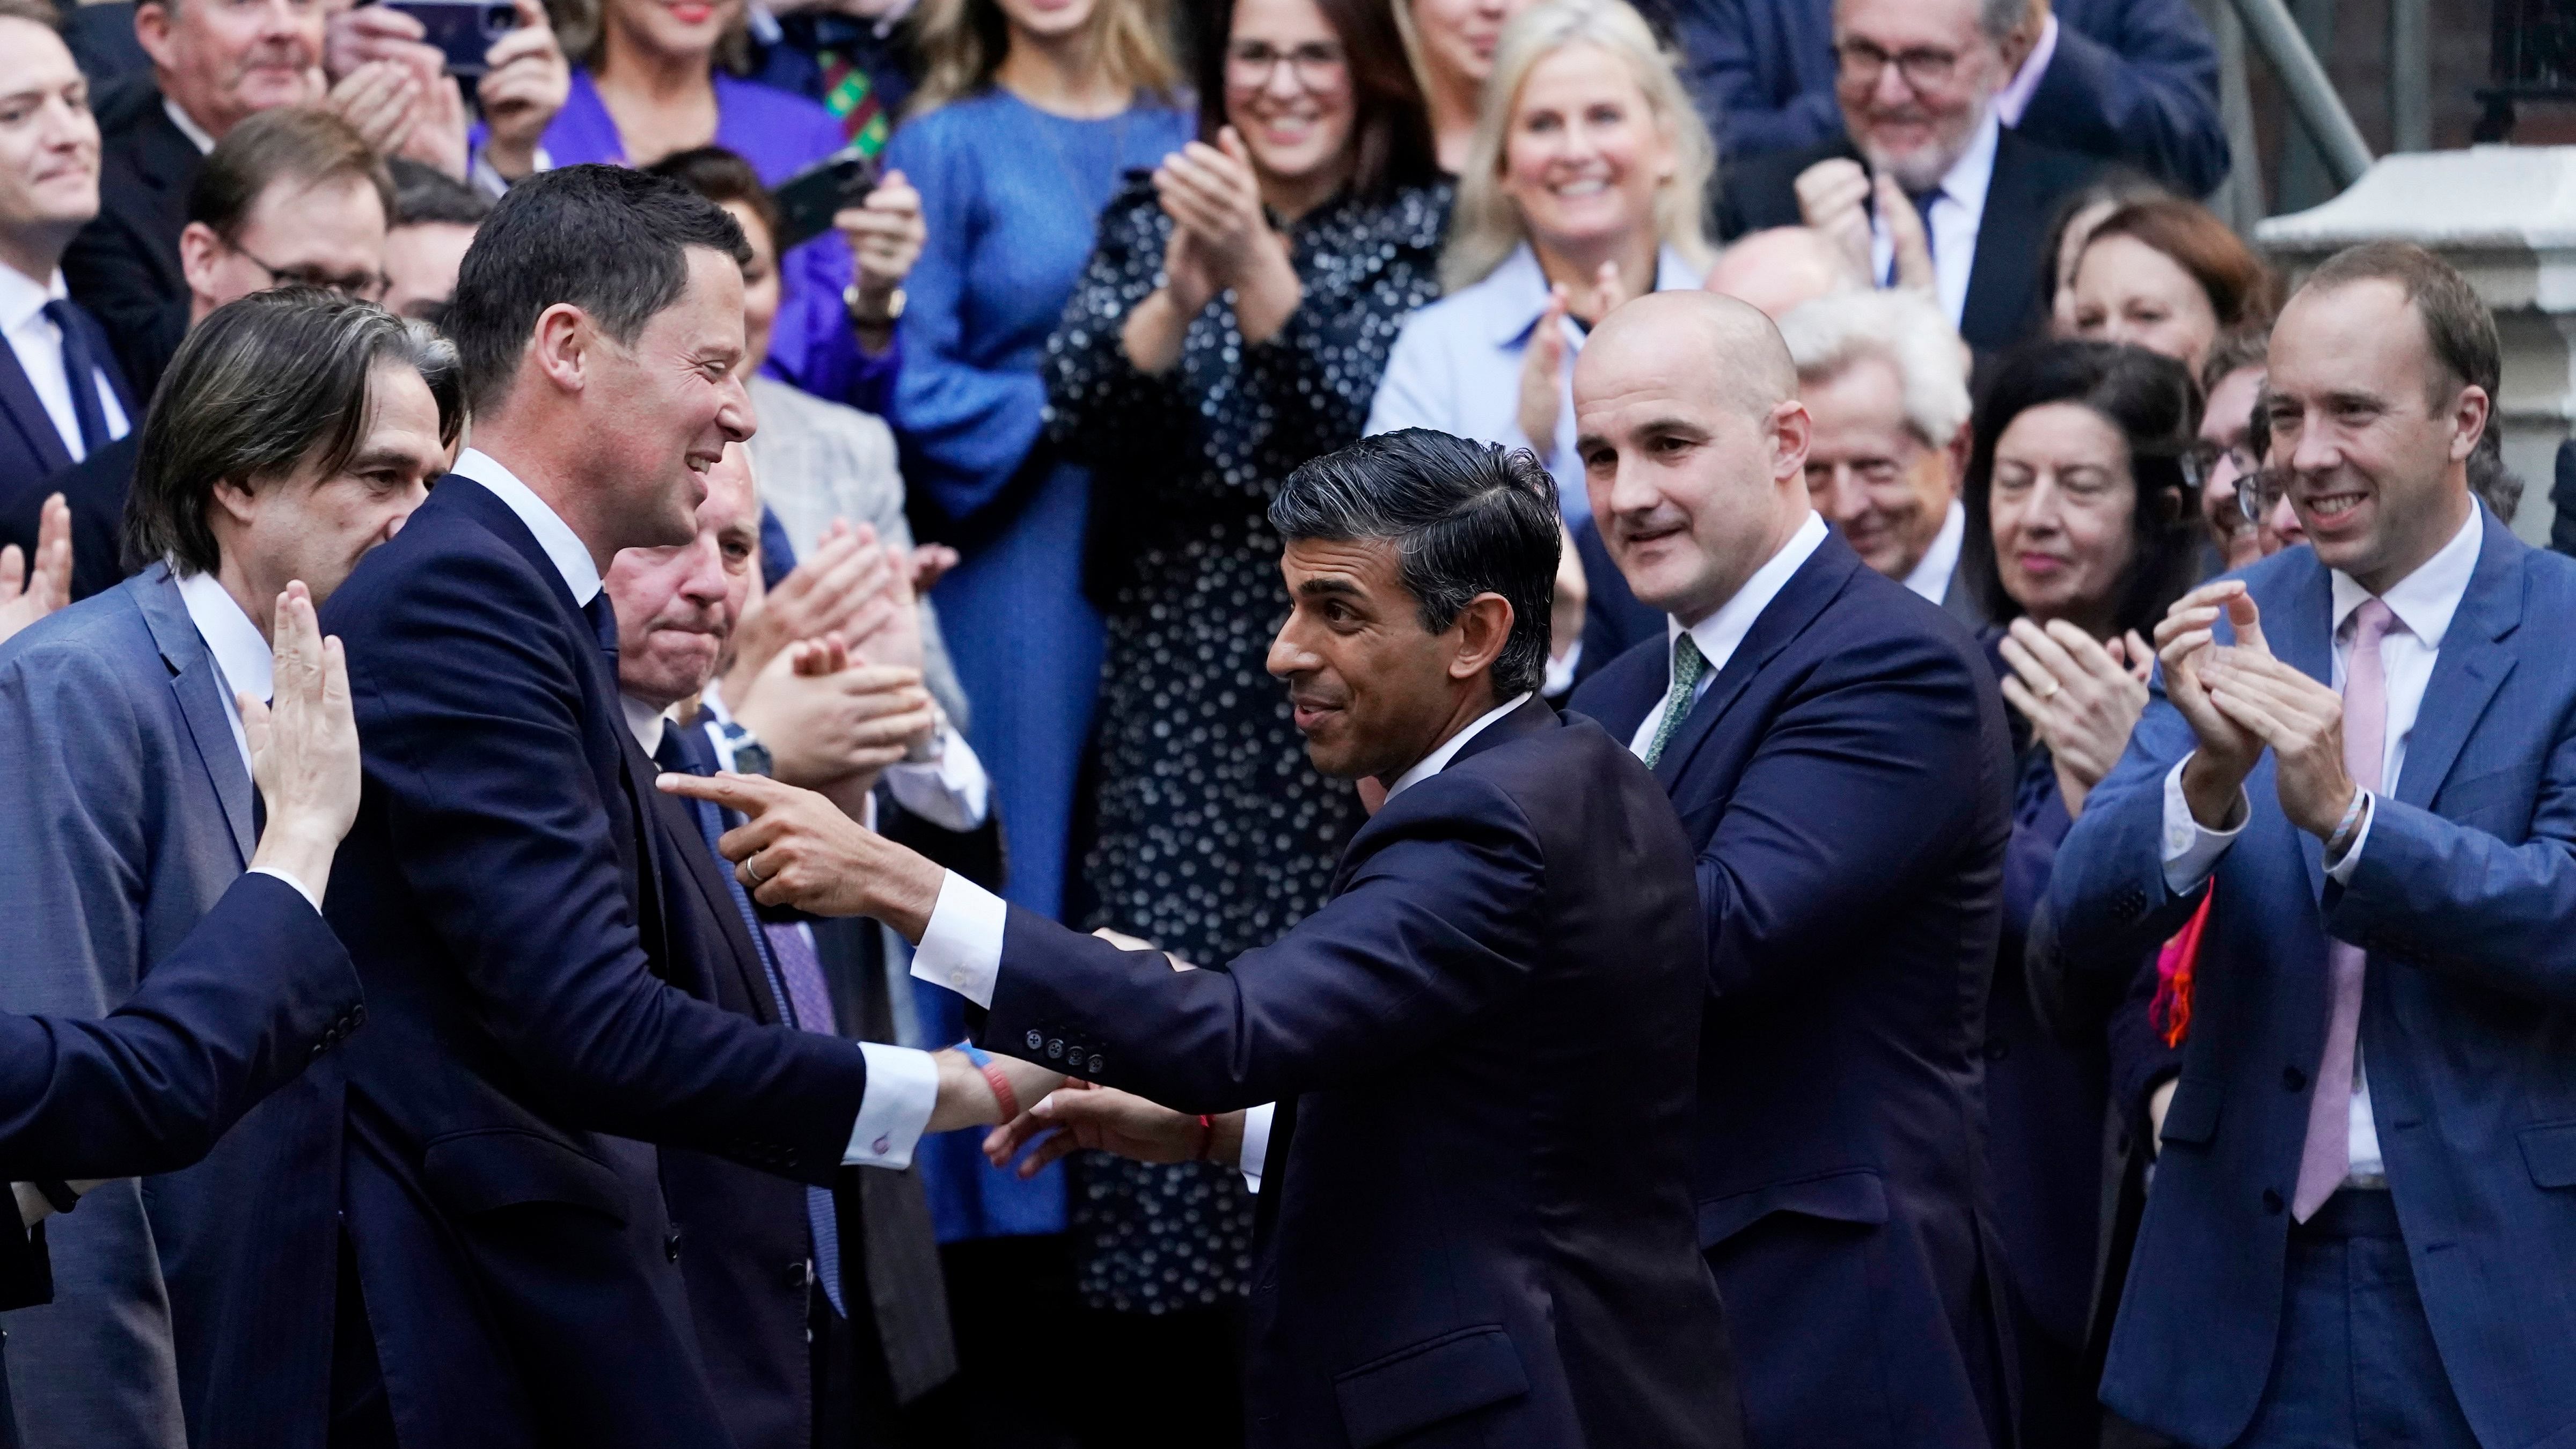 Rishi Sunak, centre, gestures as conservative MPs greet him after arriving at the Conservative Party leadership contest at the Conservative party Headquarters in London. Credit: AP Photo